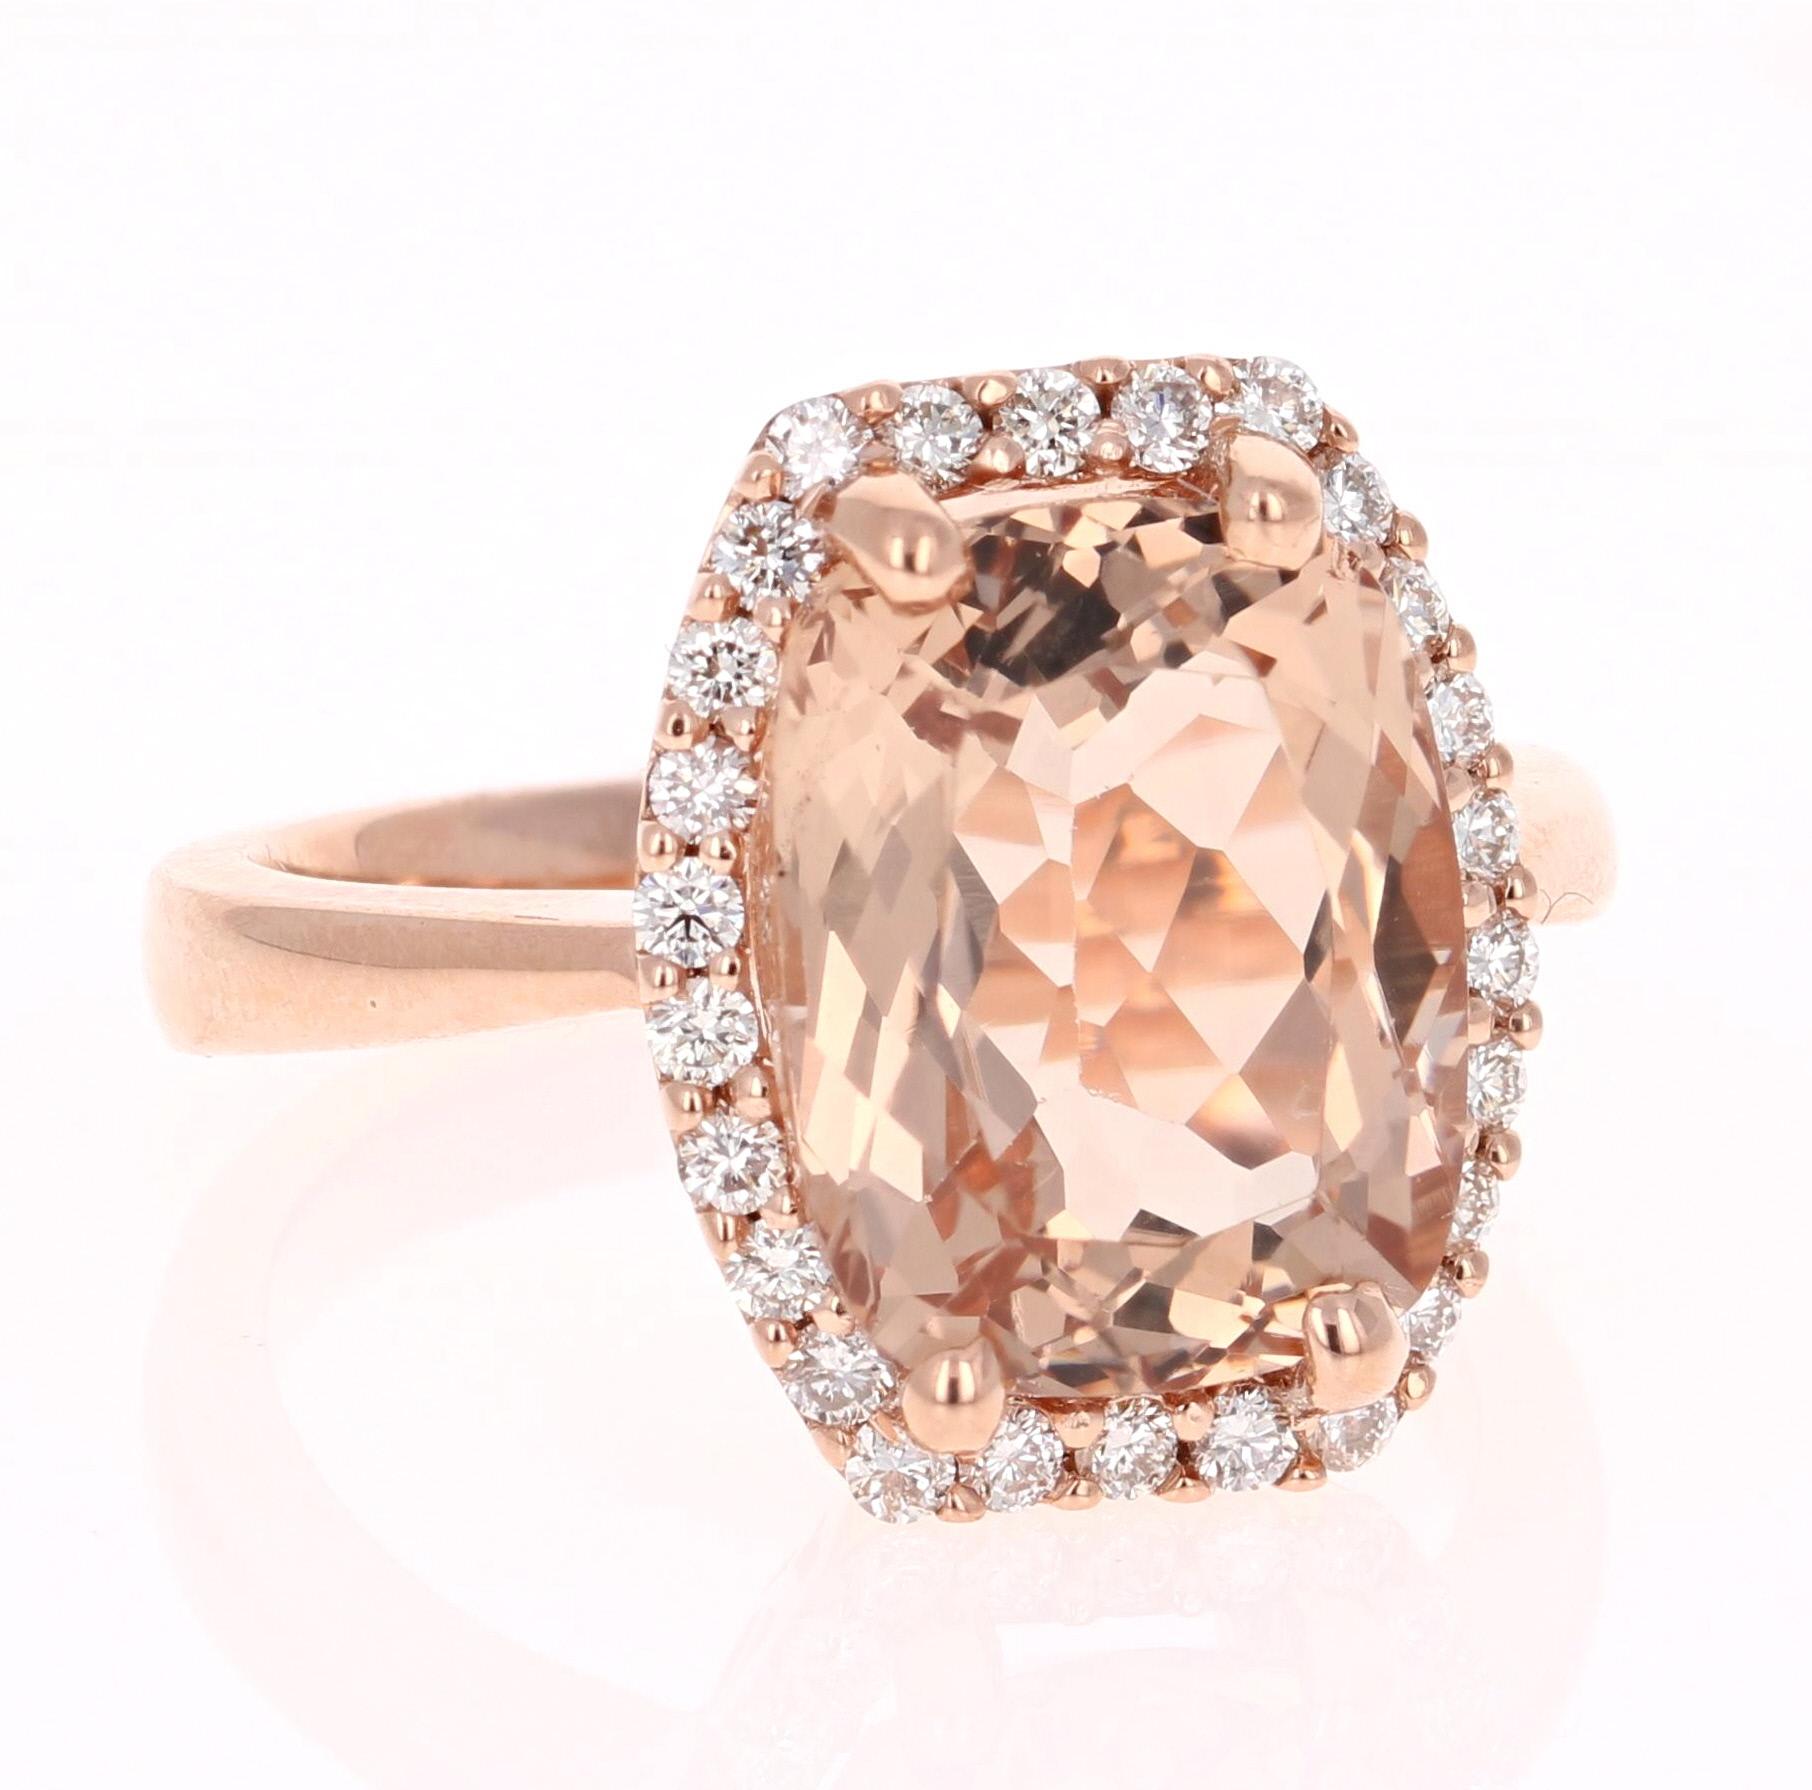 A lovely Engagement Ring Option! This simple yet gorgeous Morganite Ring has a 6.16 Carat Cushion Cut Morganite as its center and has a beautiful simple halo of 26 Round Cut Diamonds that weigh 0.42 carats. The total carat weight of the ring is 6.58